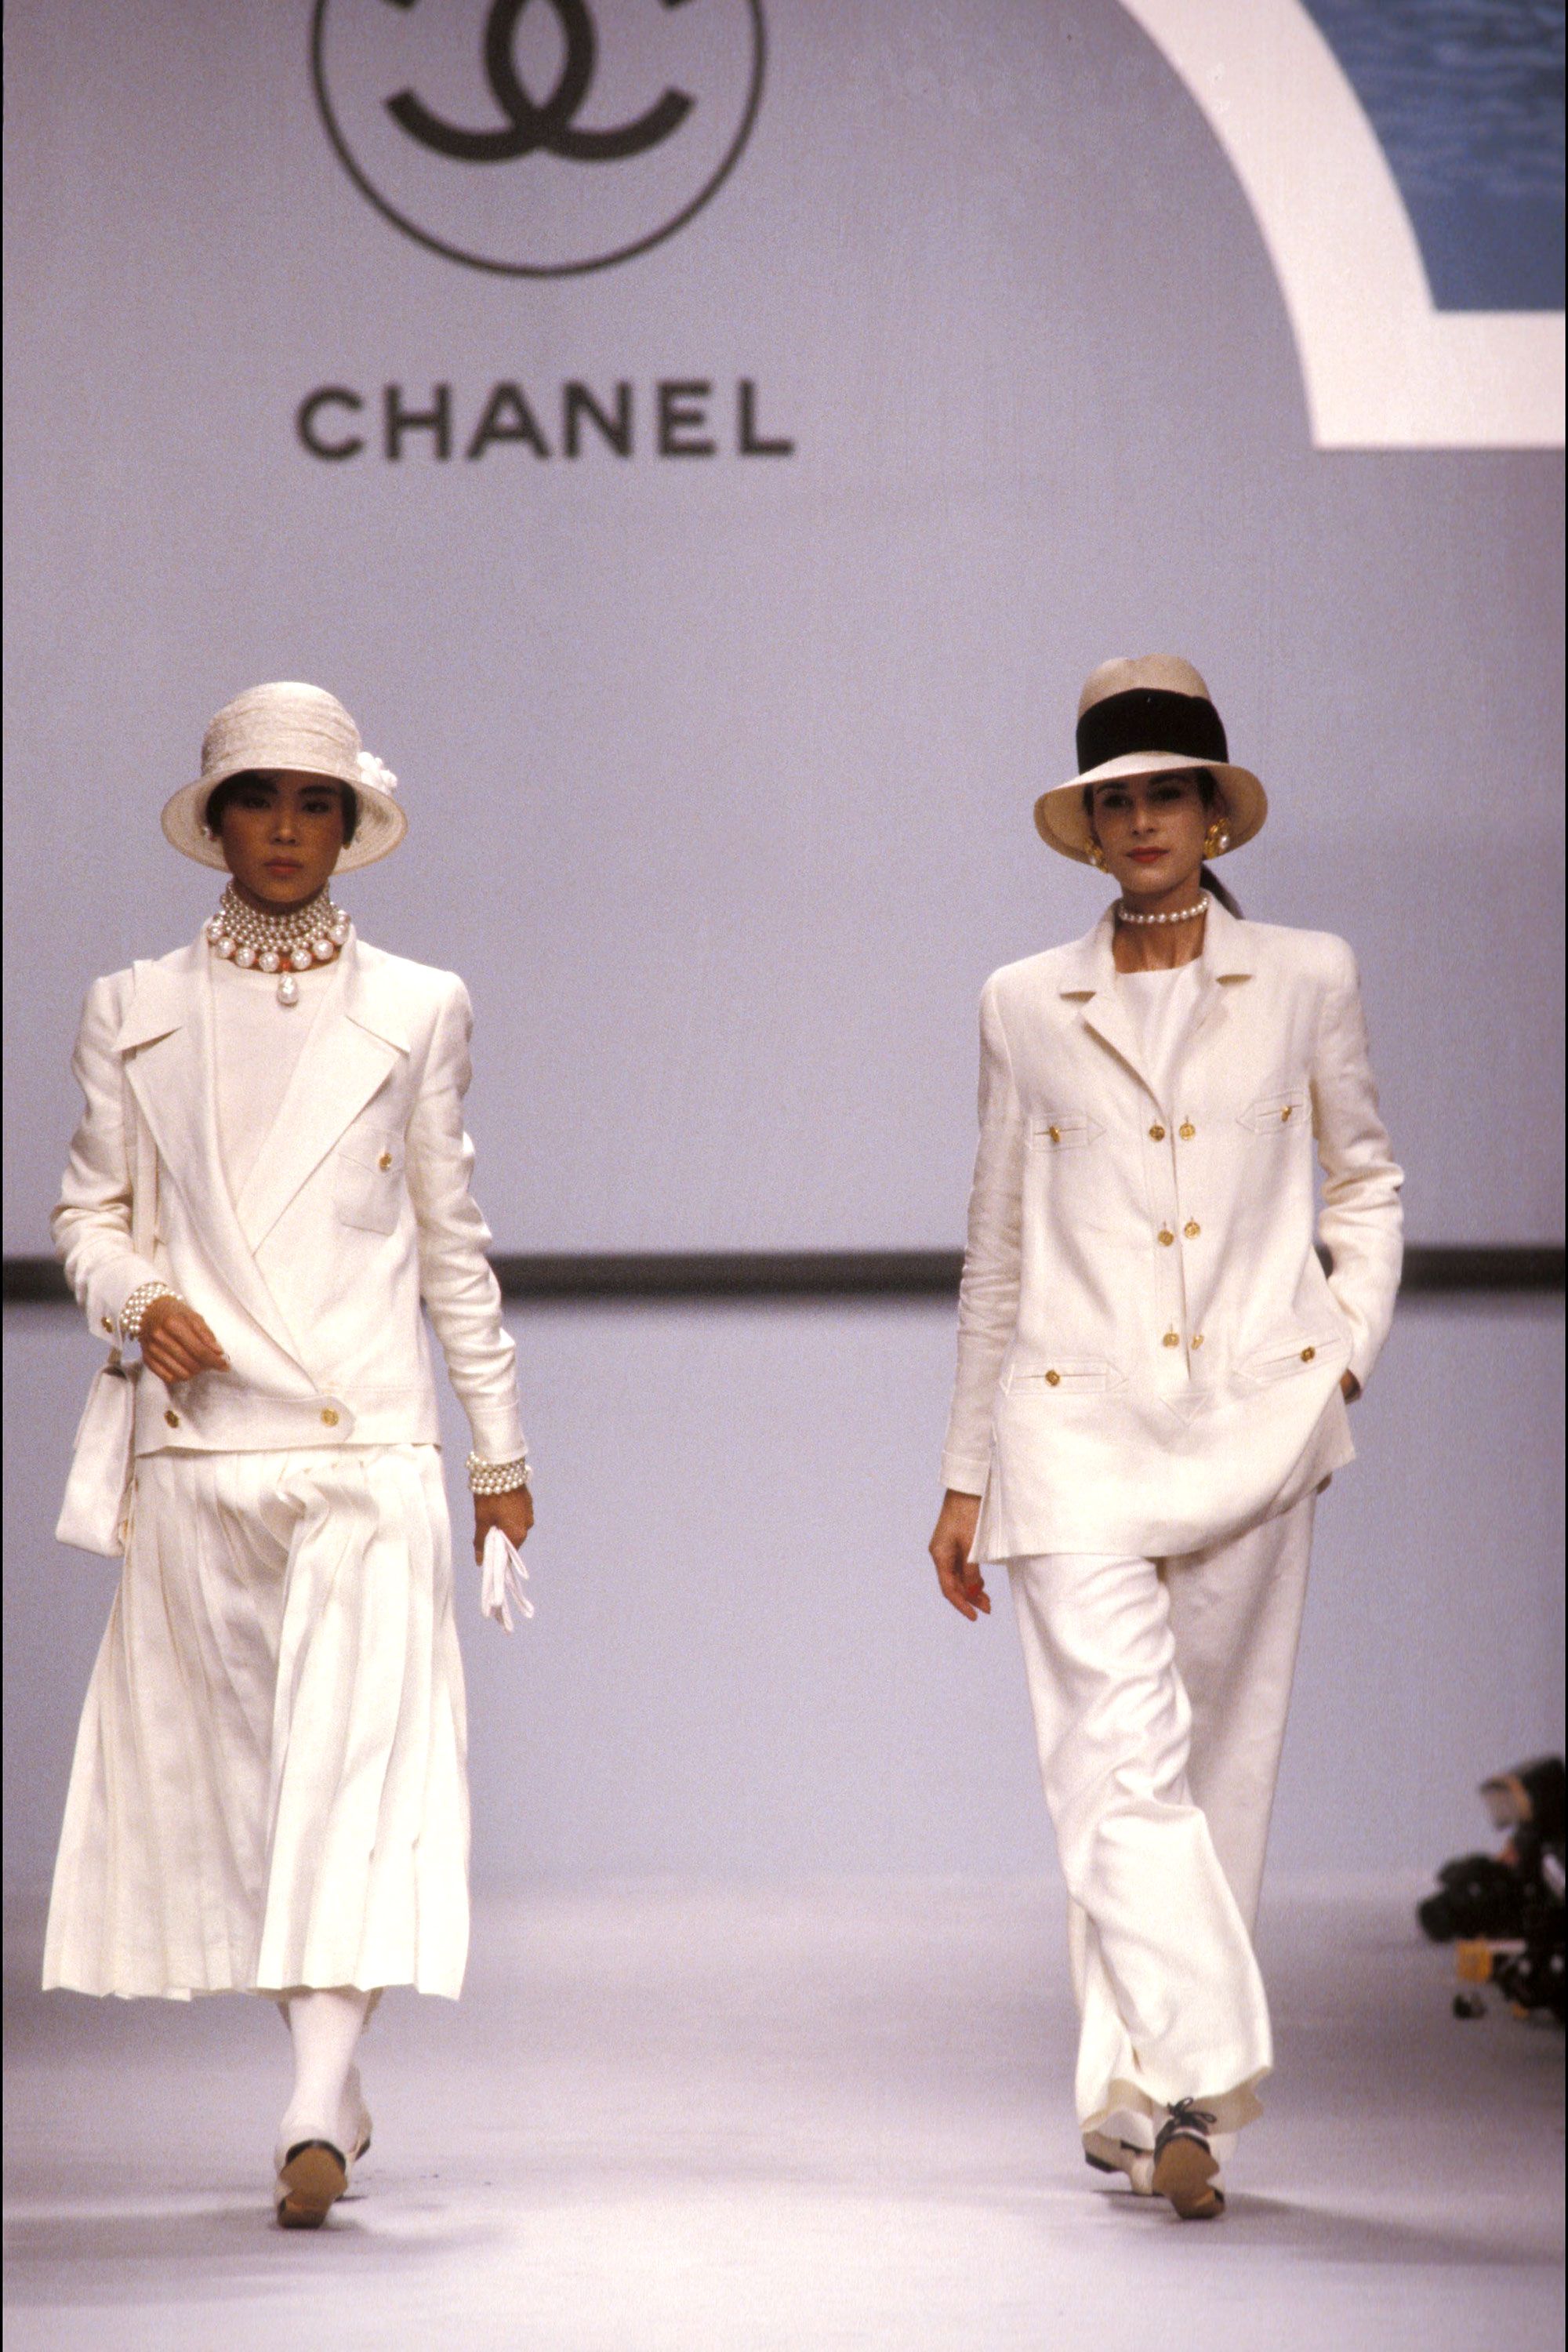 Chanel's Fashion Shows Over the Years - 1978 - 2015 Chanel Runway Images